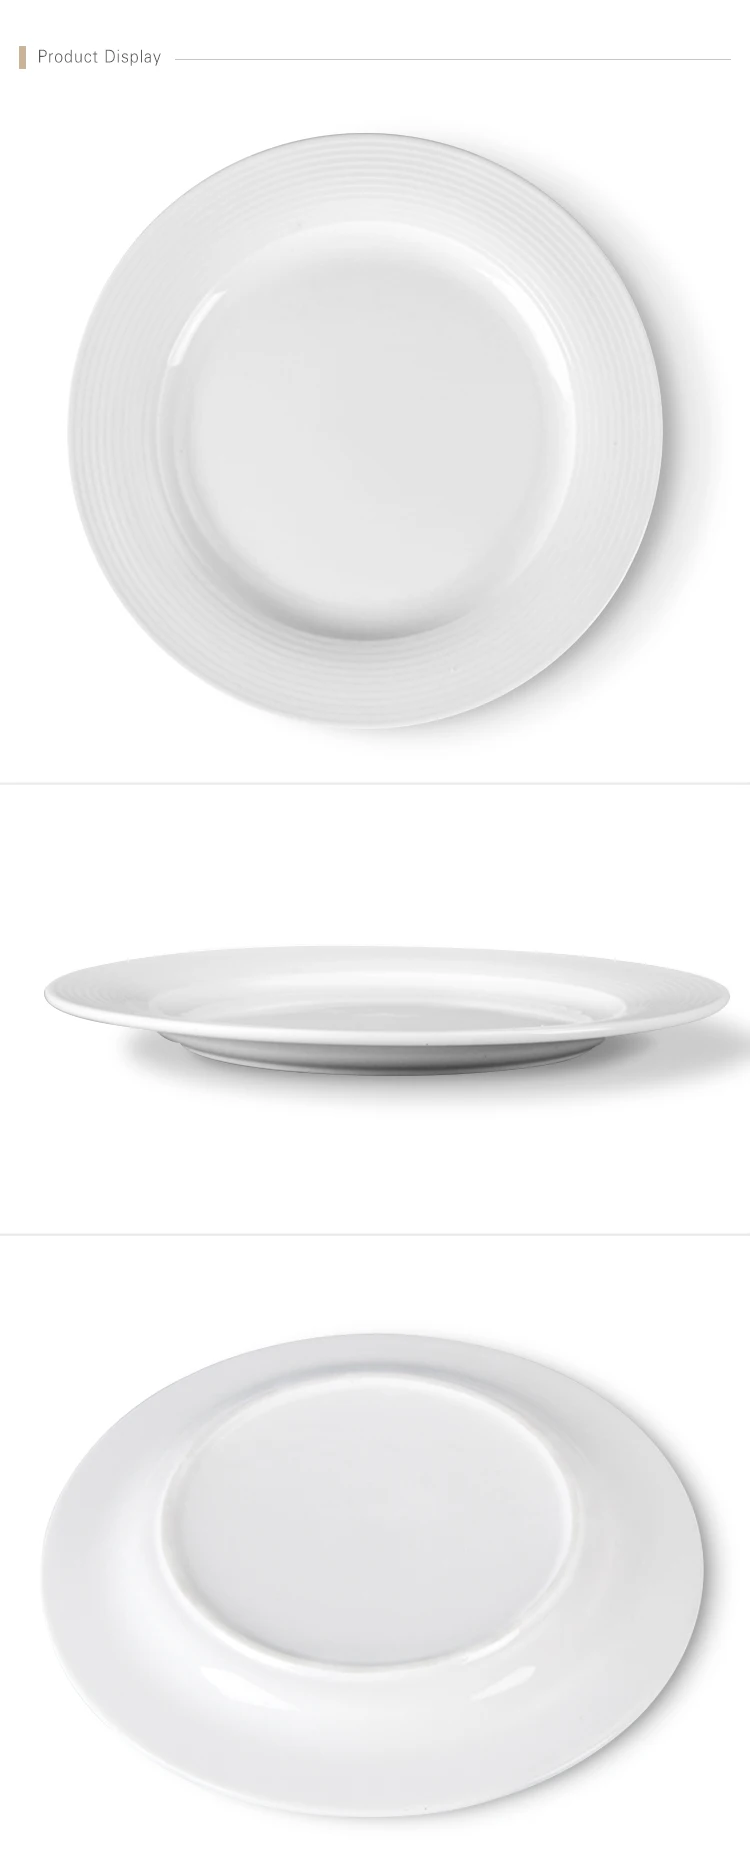 Western Style Durable Club Plates Sets Dinnerware, Moden Crockery Ceramic Plate Round, Wholesale Oven Safe Catering White Plate%